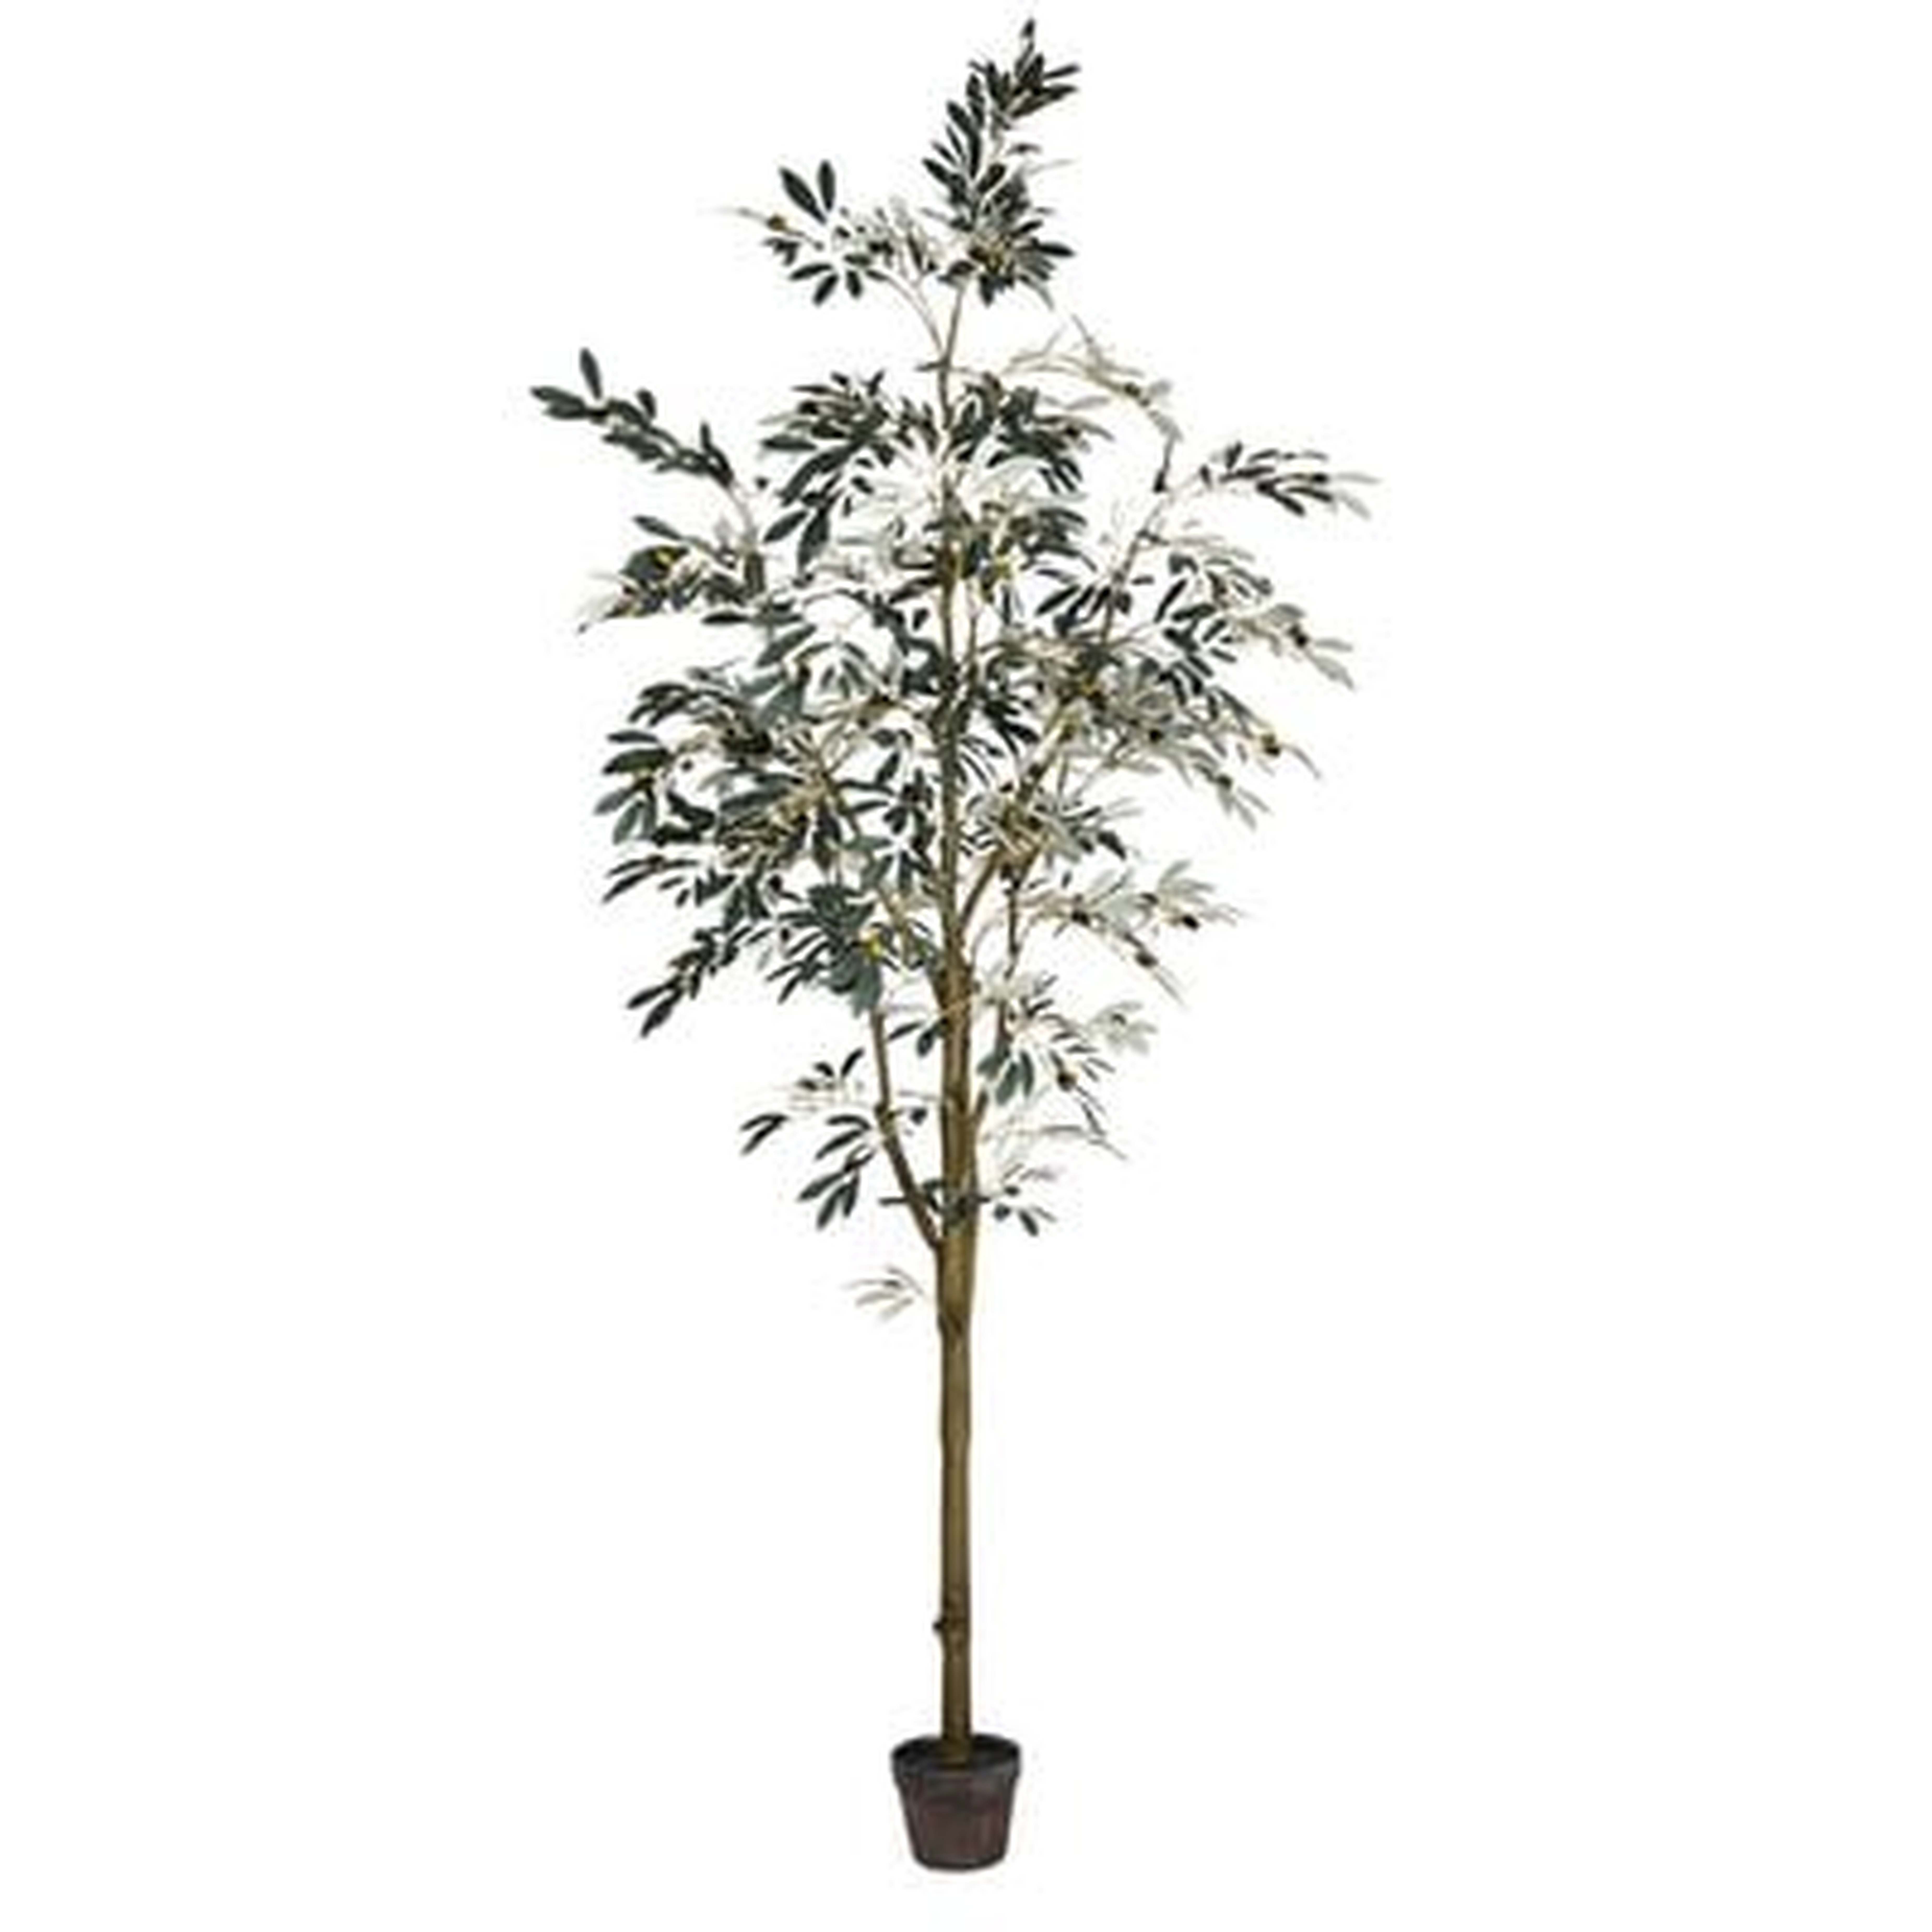 Artificial Potted Olive Floor Foliage Tree in Pot - Wayfair